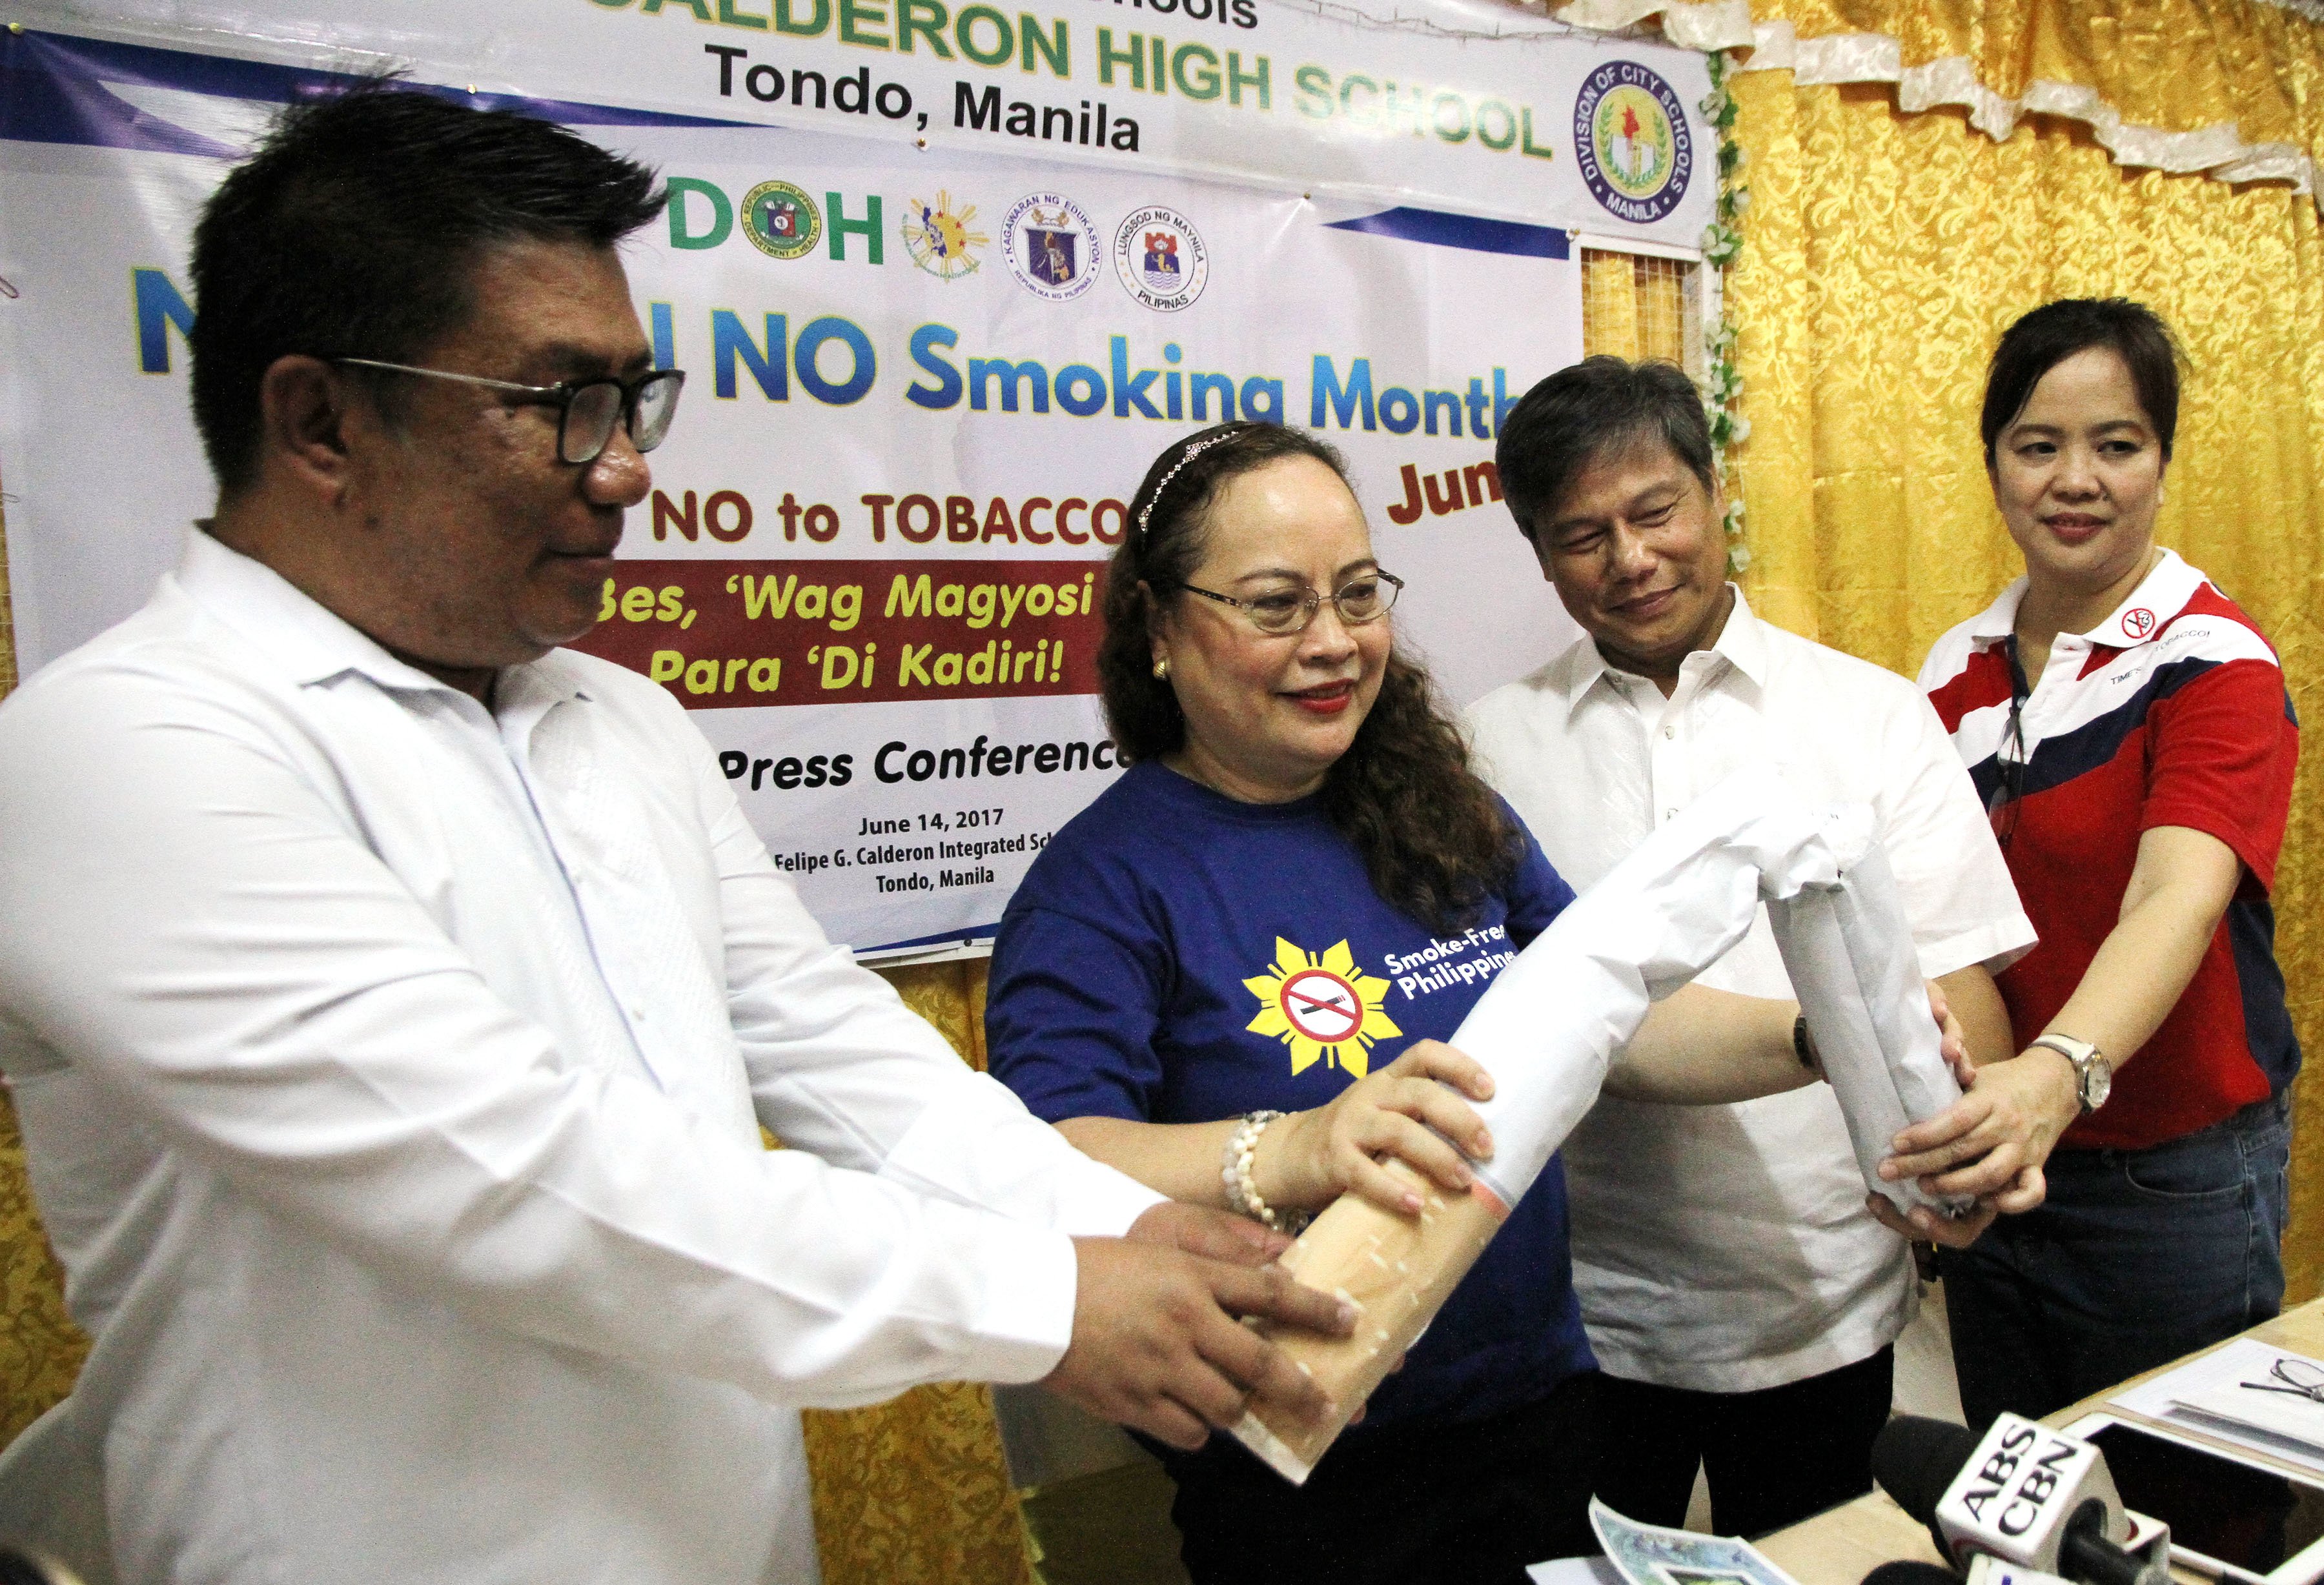 DOH: Month of June is National No Smoking